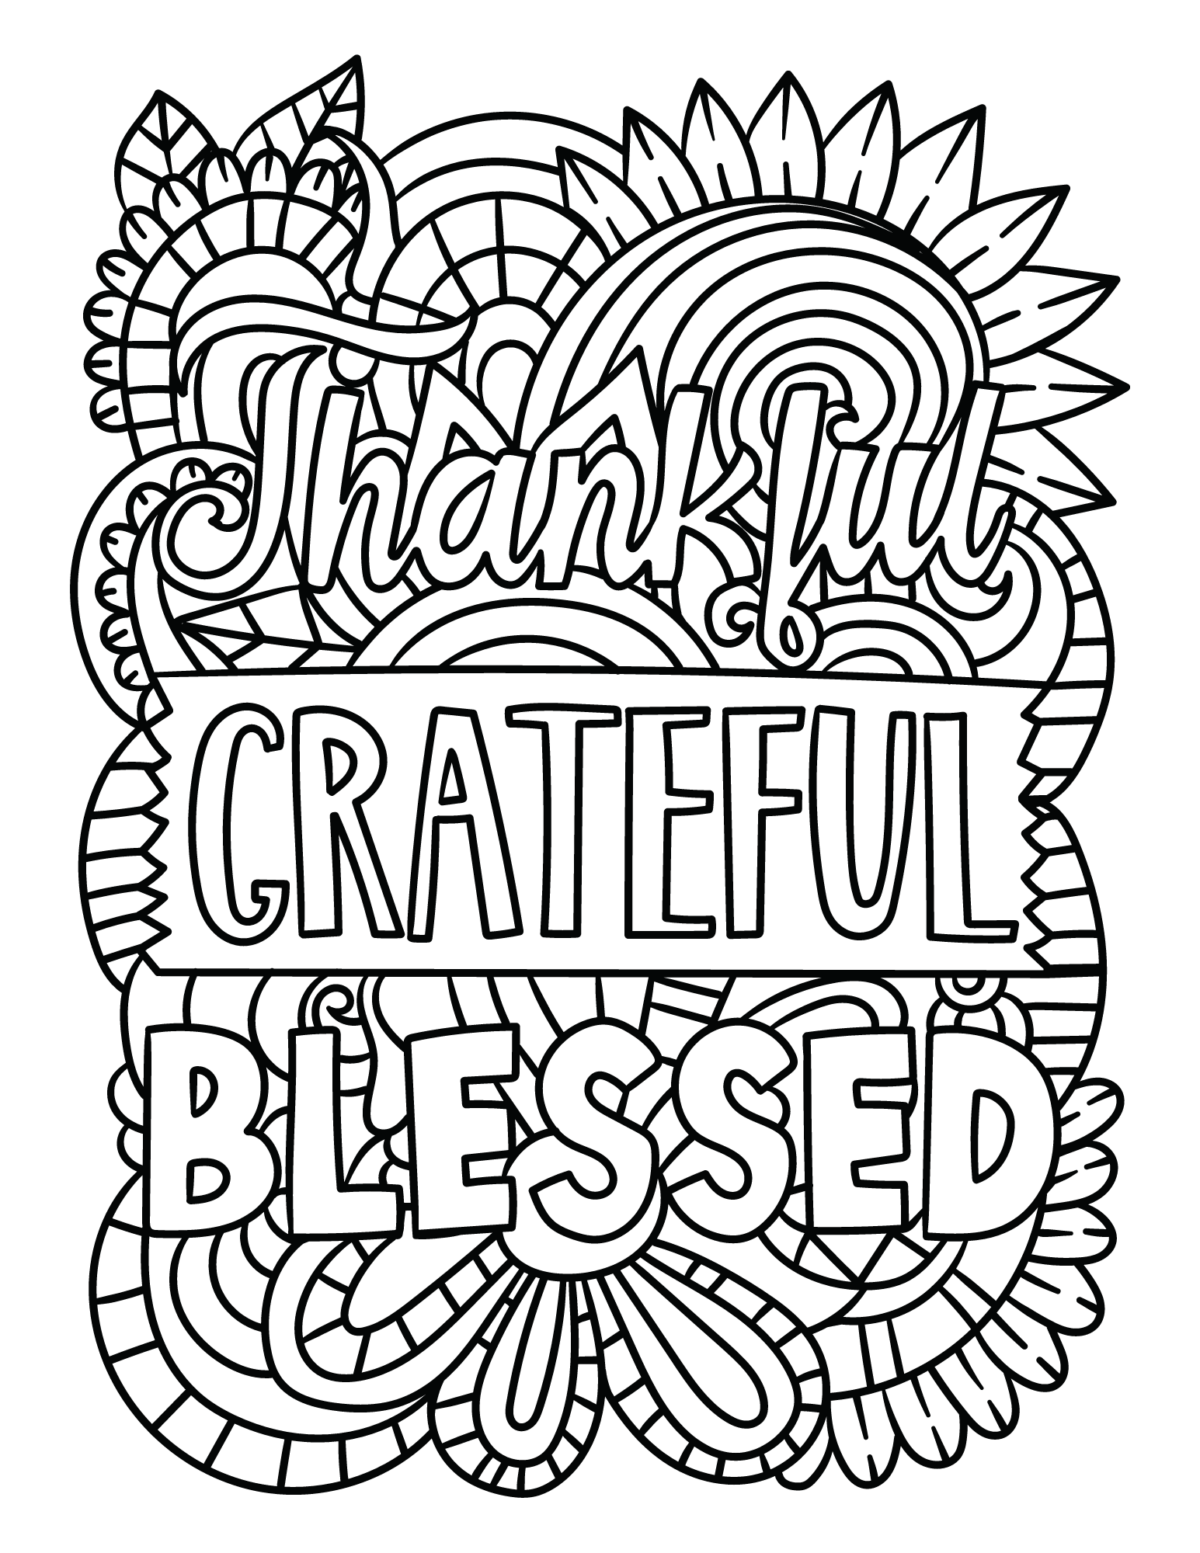 Coloring page that says thankful, grateful, blessed